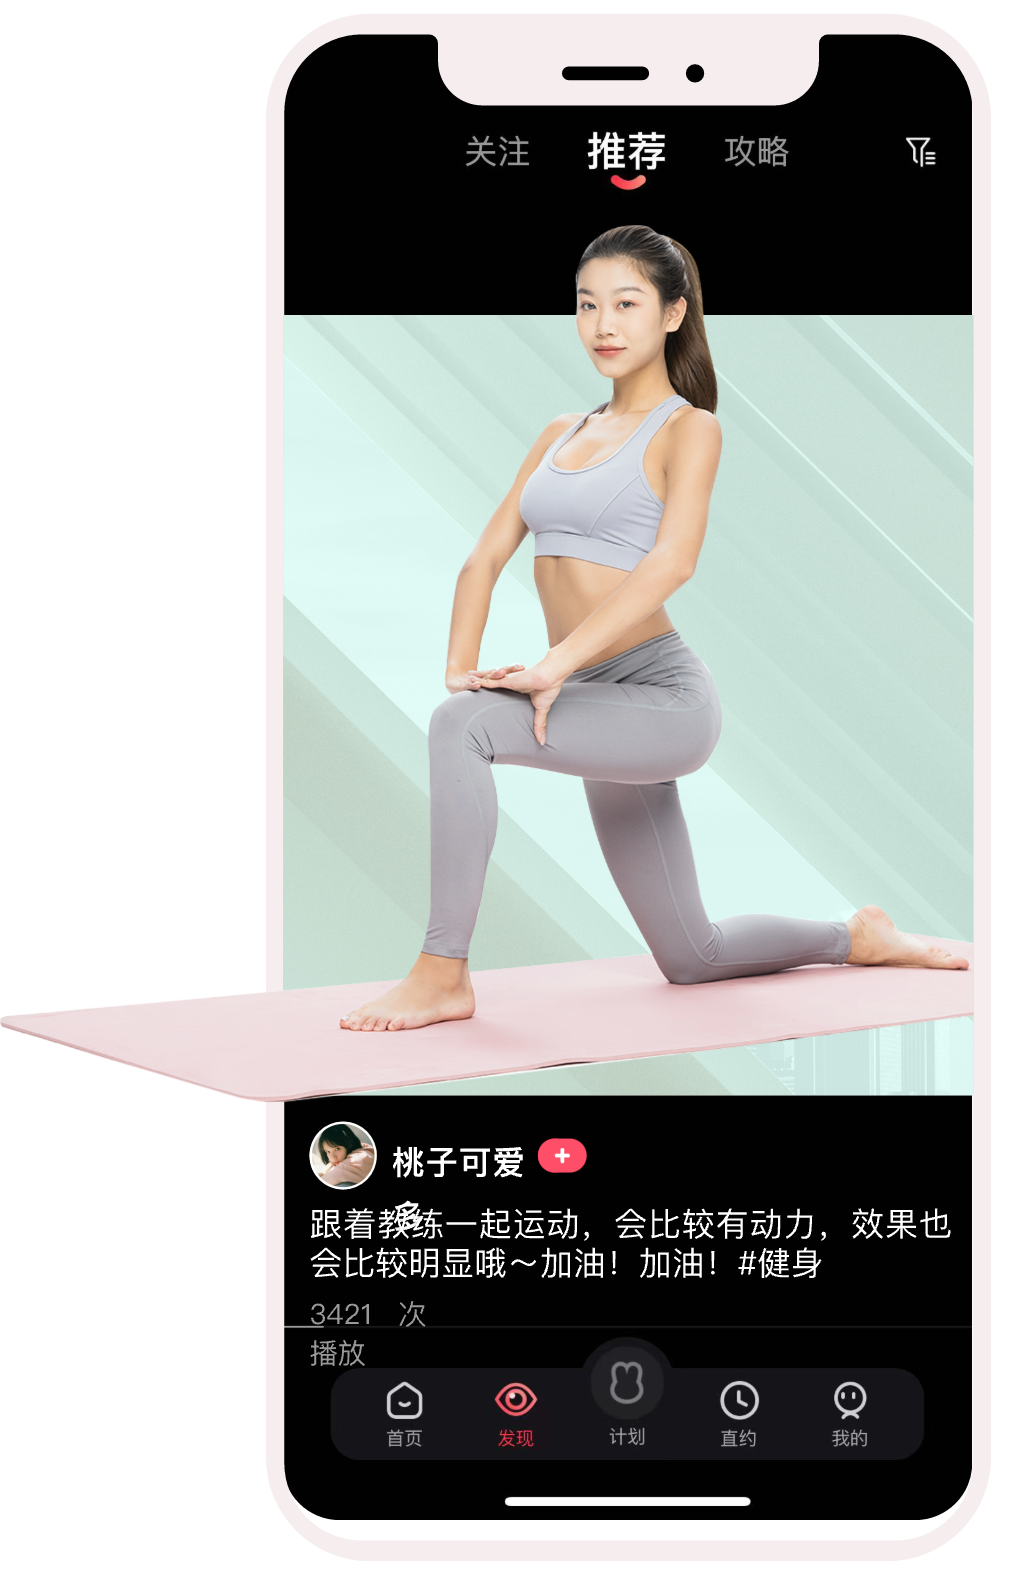 Gathering place for billions of fitness enthusiasts.<br /> Sports rehabilitation, find Yue Ye Tu